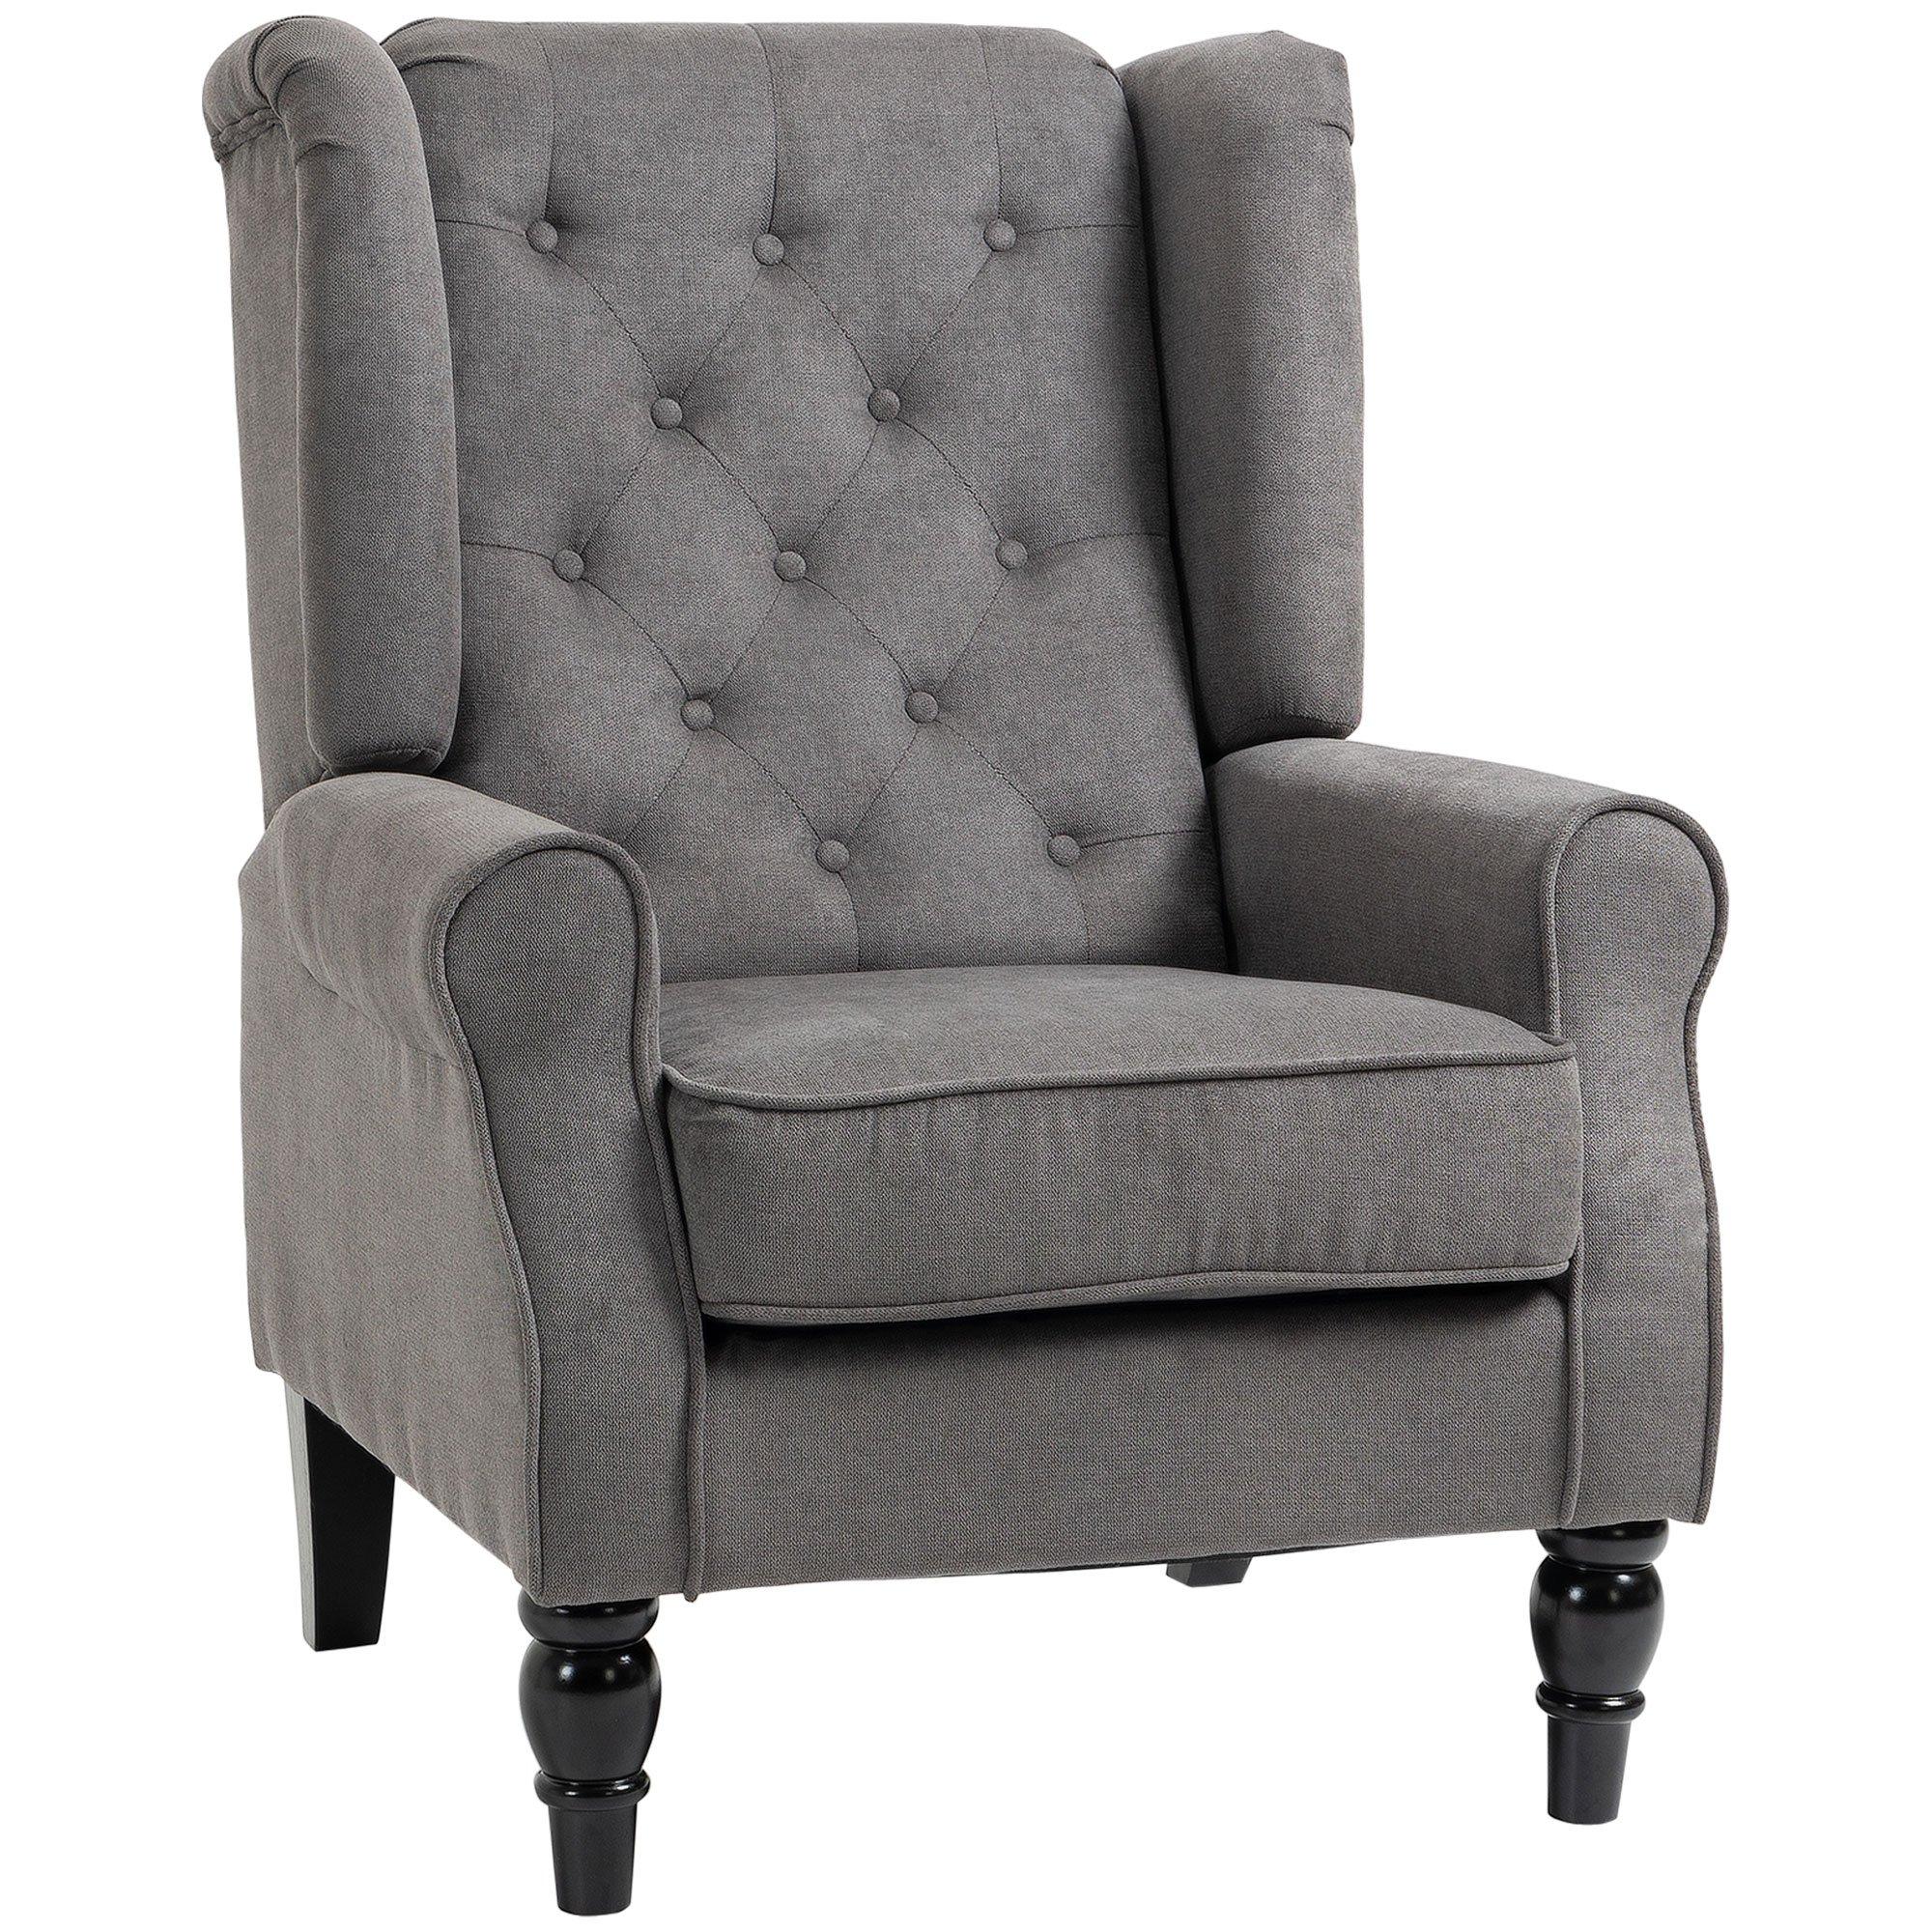 Retro Accent Chair Wingback Armchair with Wood Frame Living Room